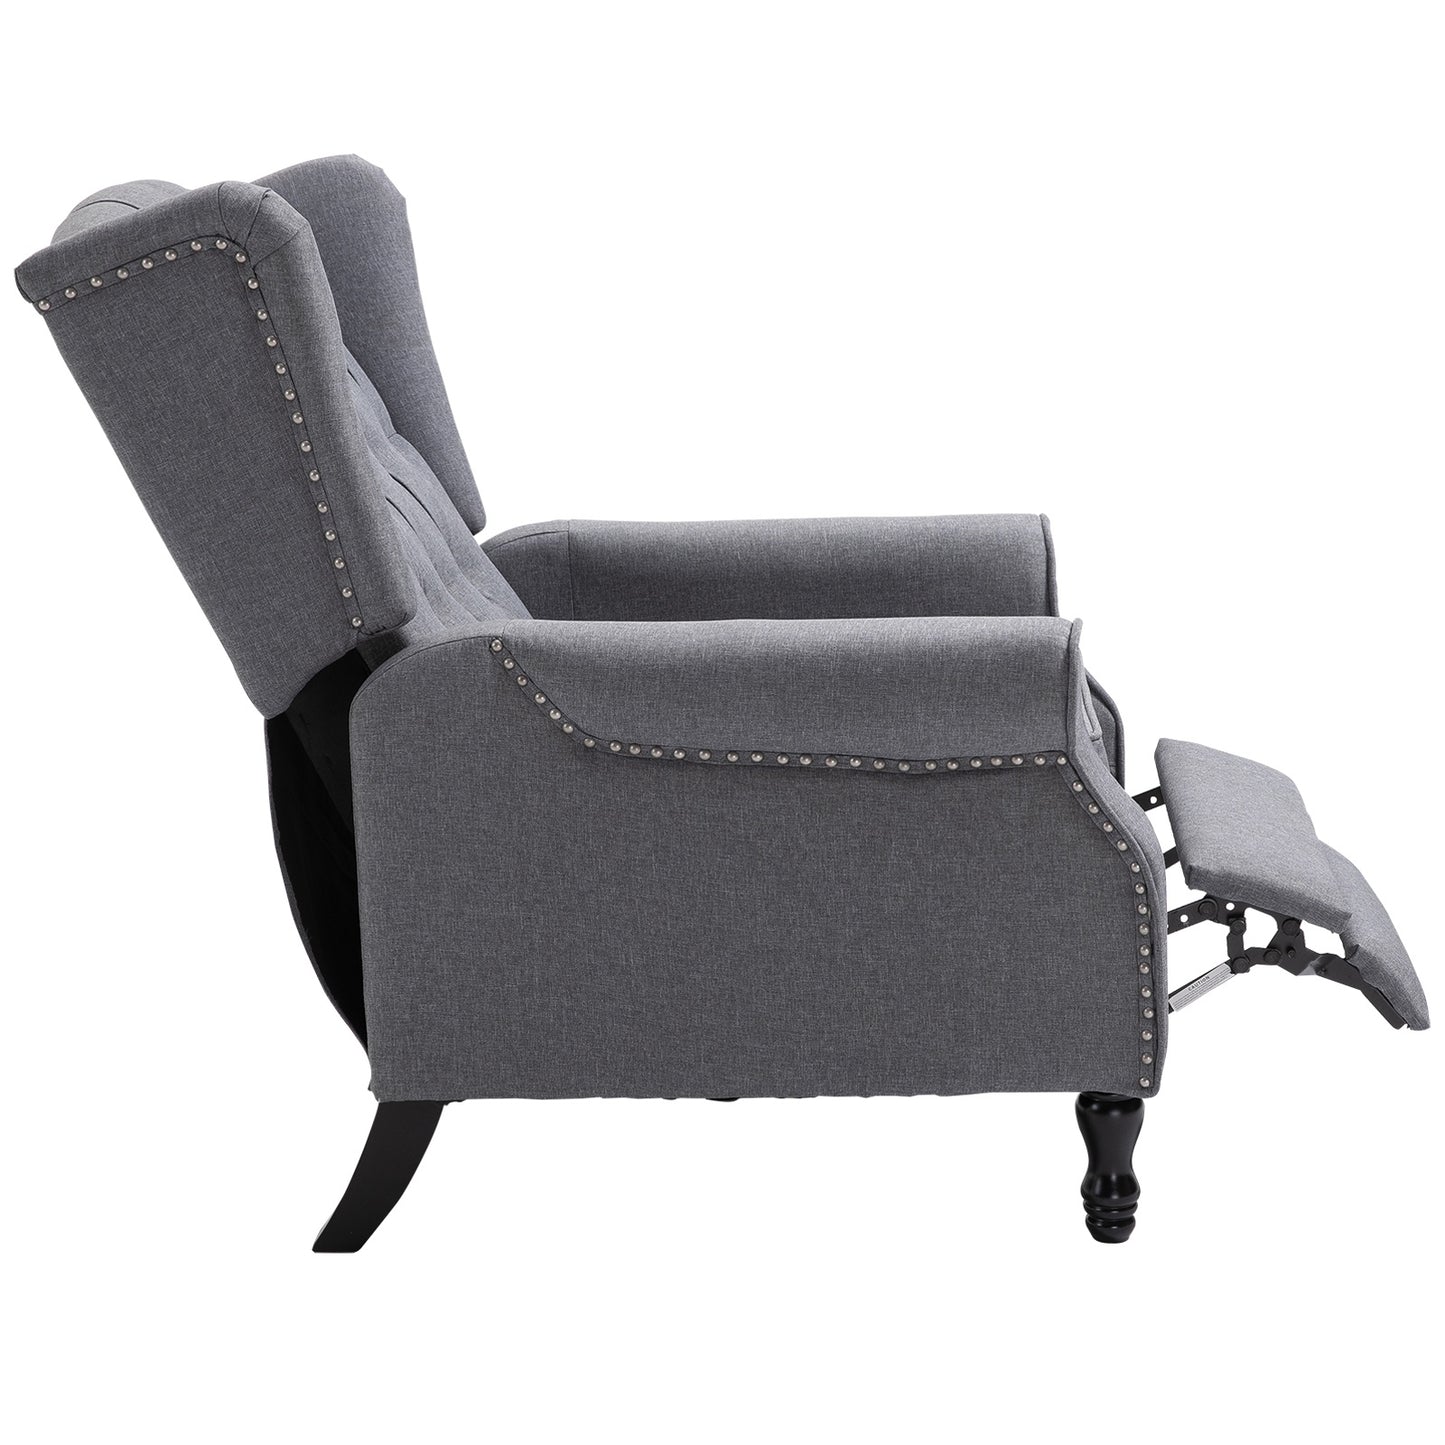 HOMCOM Reclining Wingback Armchair, with Footrest - Grey